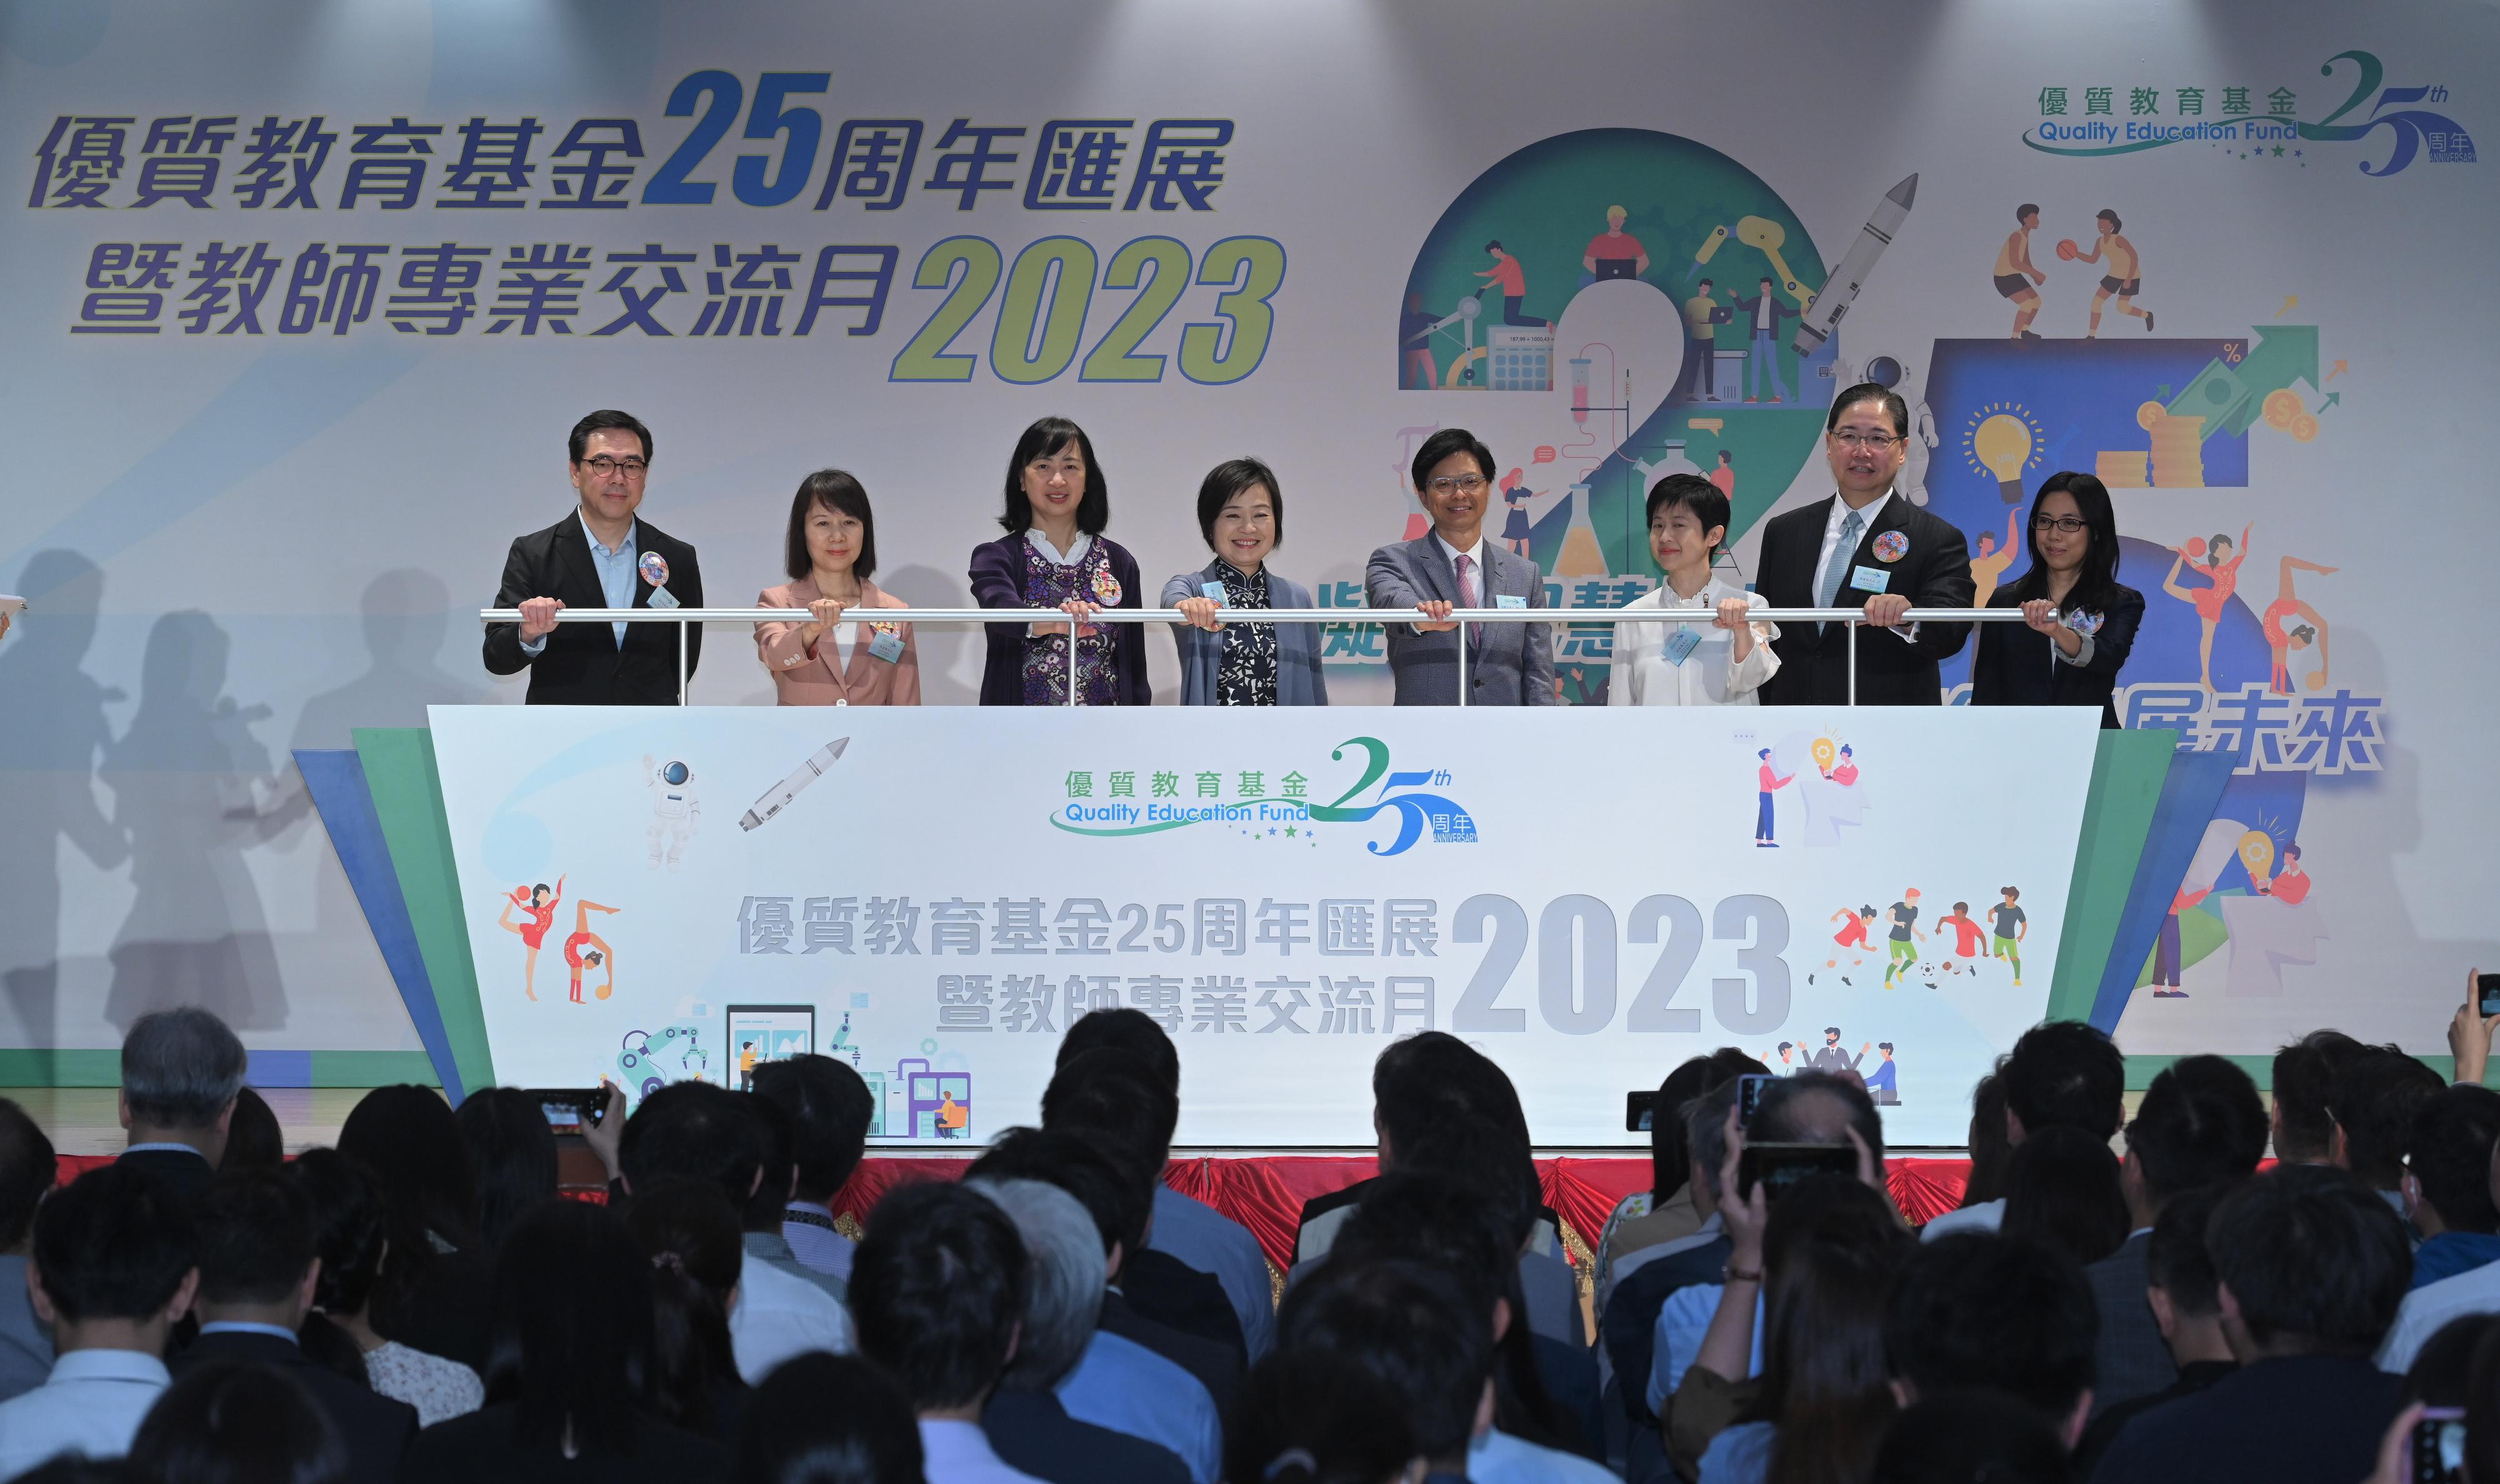 The Quality Education Fund (QEF) held the Opening cum Prize Presentation Ceremony of the QEF 25th Anniversary Exposition cum Teachers' Professional Experience Sharing Month 2023 today (March 25). Photo shows the Secretary for Education, Dr Choi Yuk-lin (fourth left); the Permanent Secretary for Education, Ms Michelle Li (third left); and the Chairman of the QEF Steering Committee, Dr Gordon Tsui (fourth right), officiating at the opening ceremony with other guests.